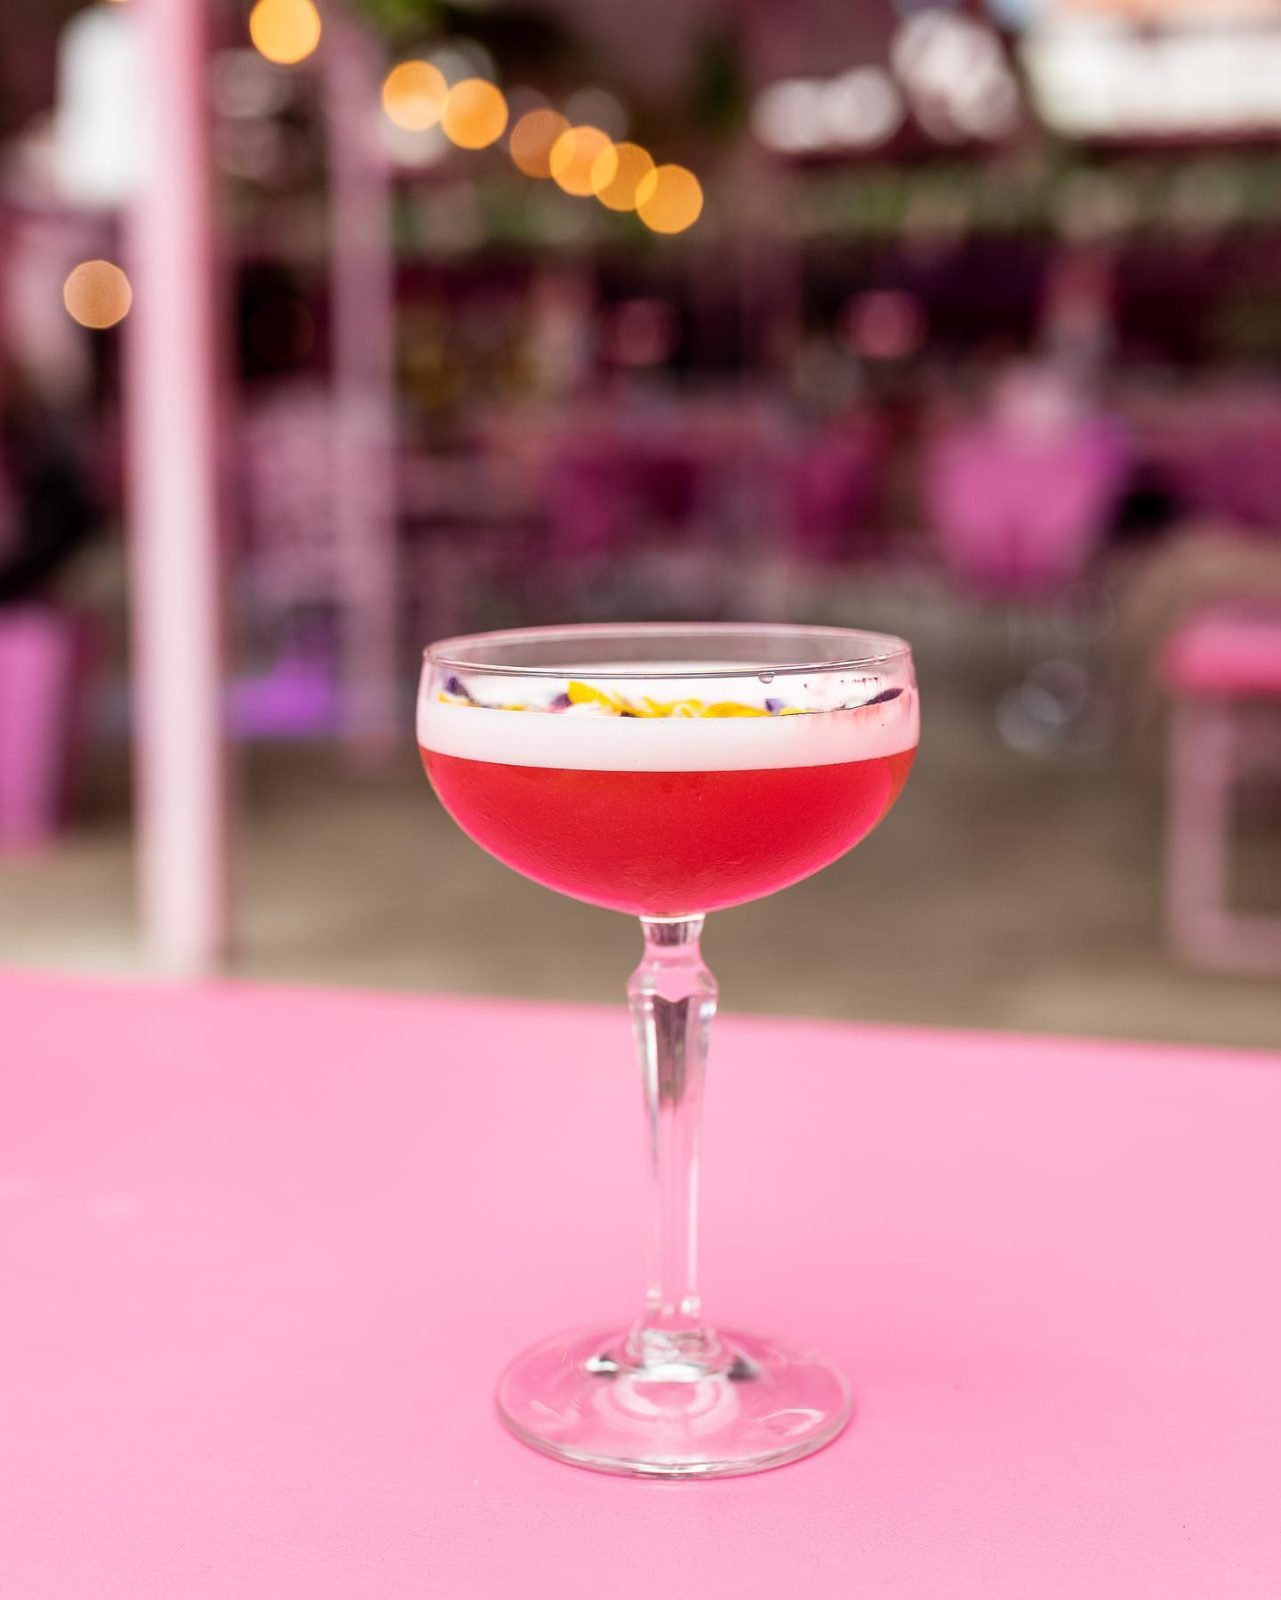 Caribbean pop-up Carnival to take over all-pink Boujee terrace in Manchester, The Manc